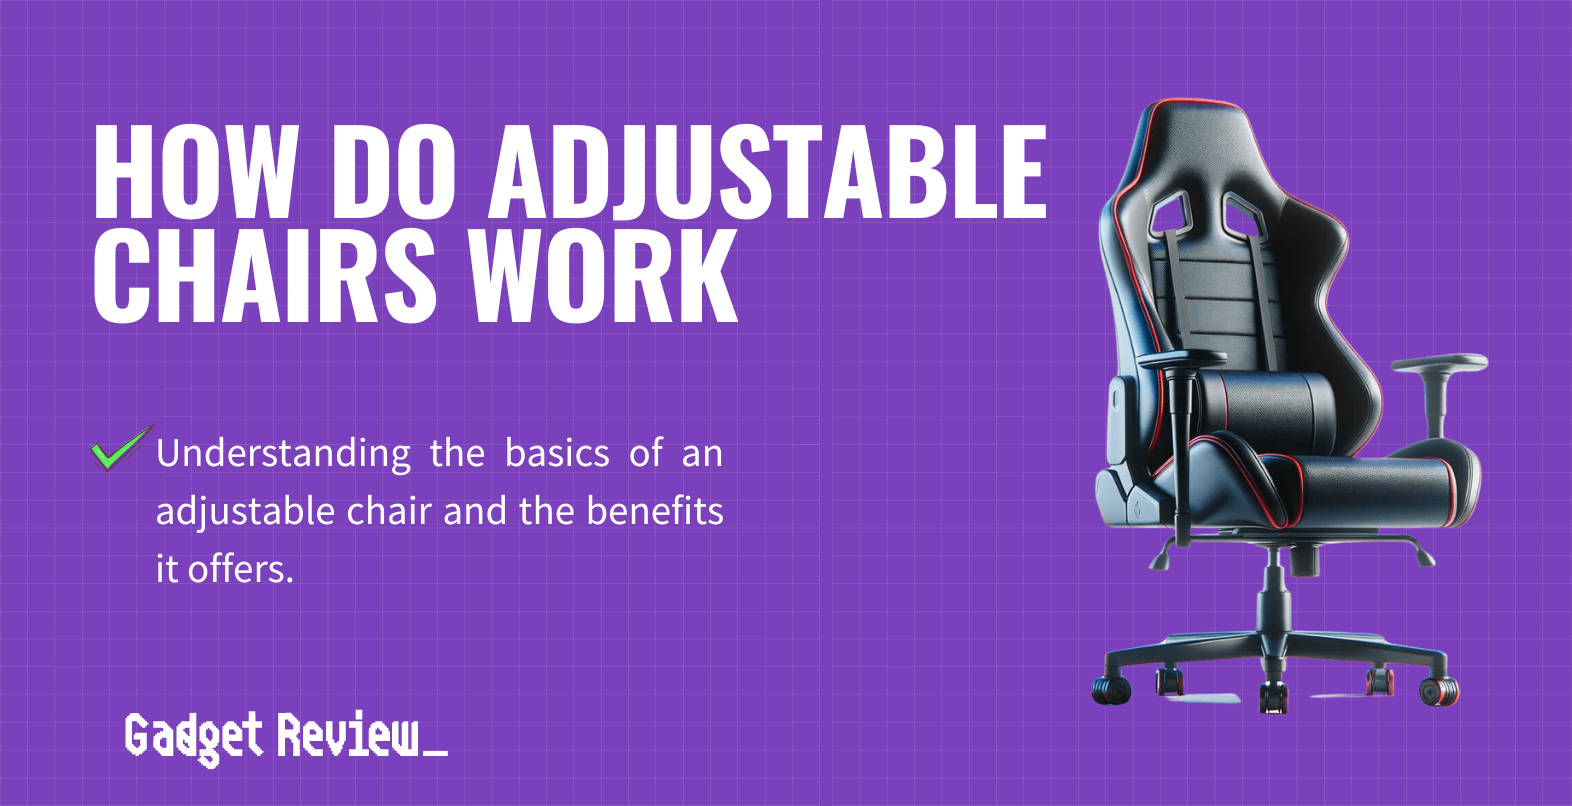 How do Adjustable Chairs Work?